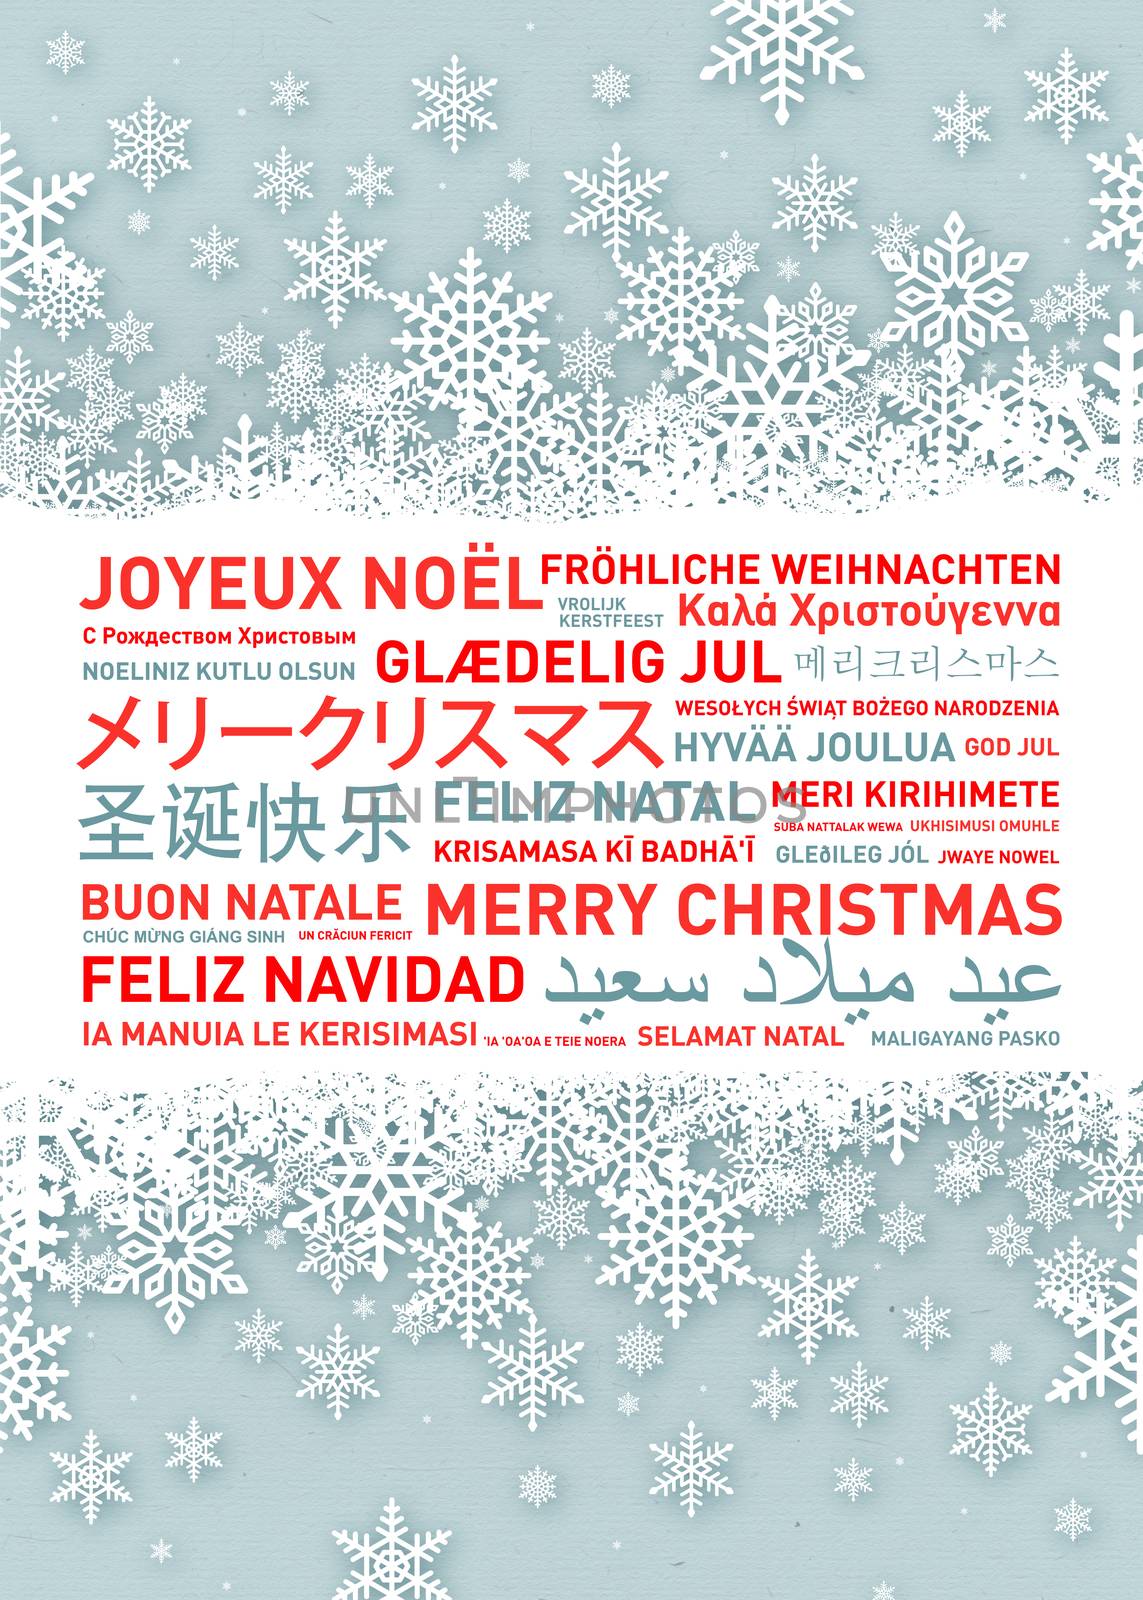 Merry christmas from the world. Different languages celebration